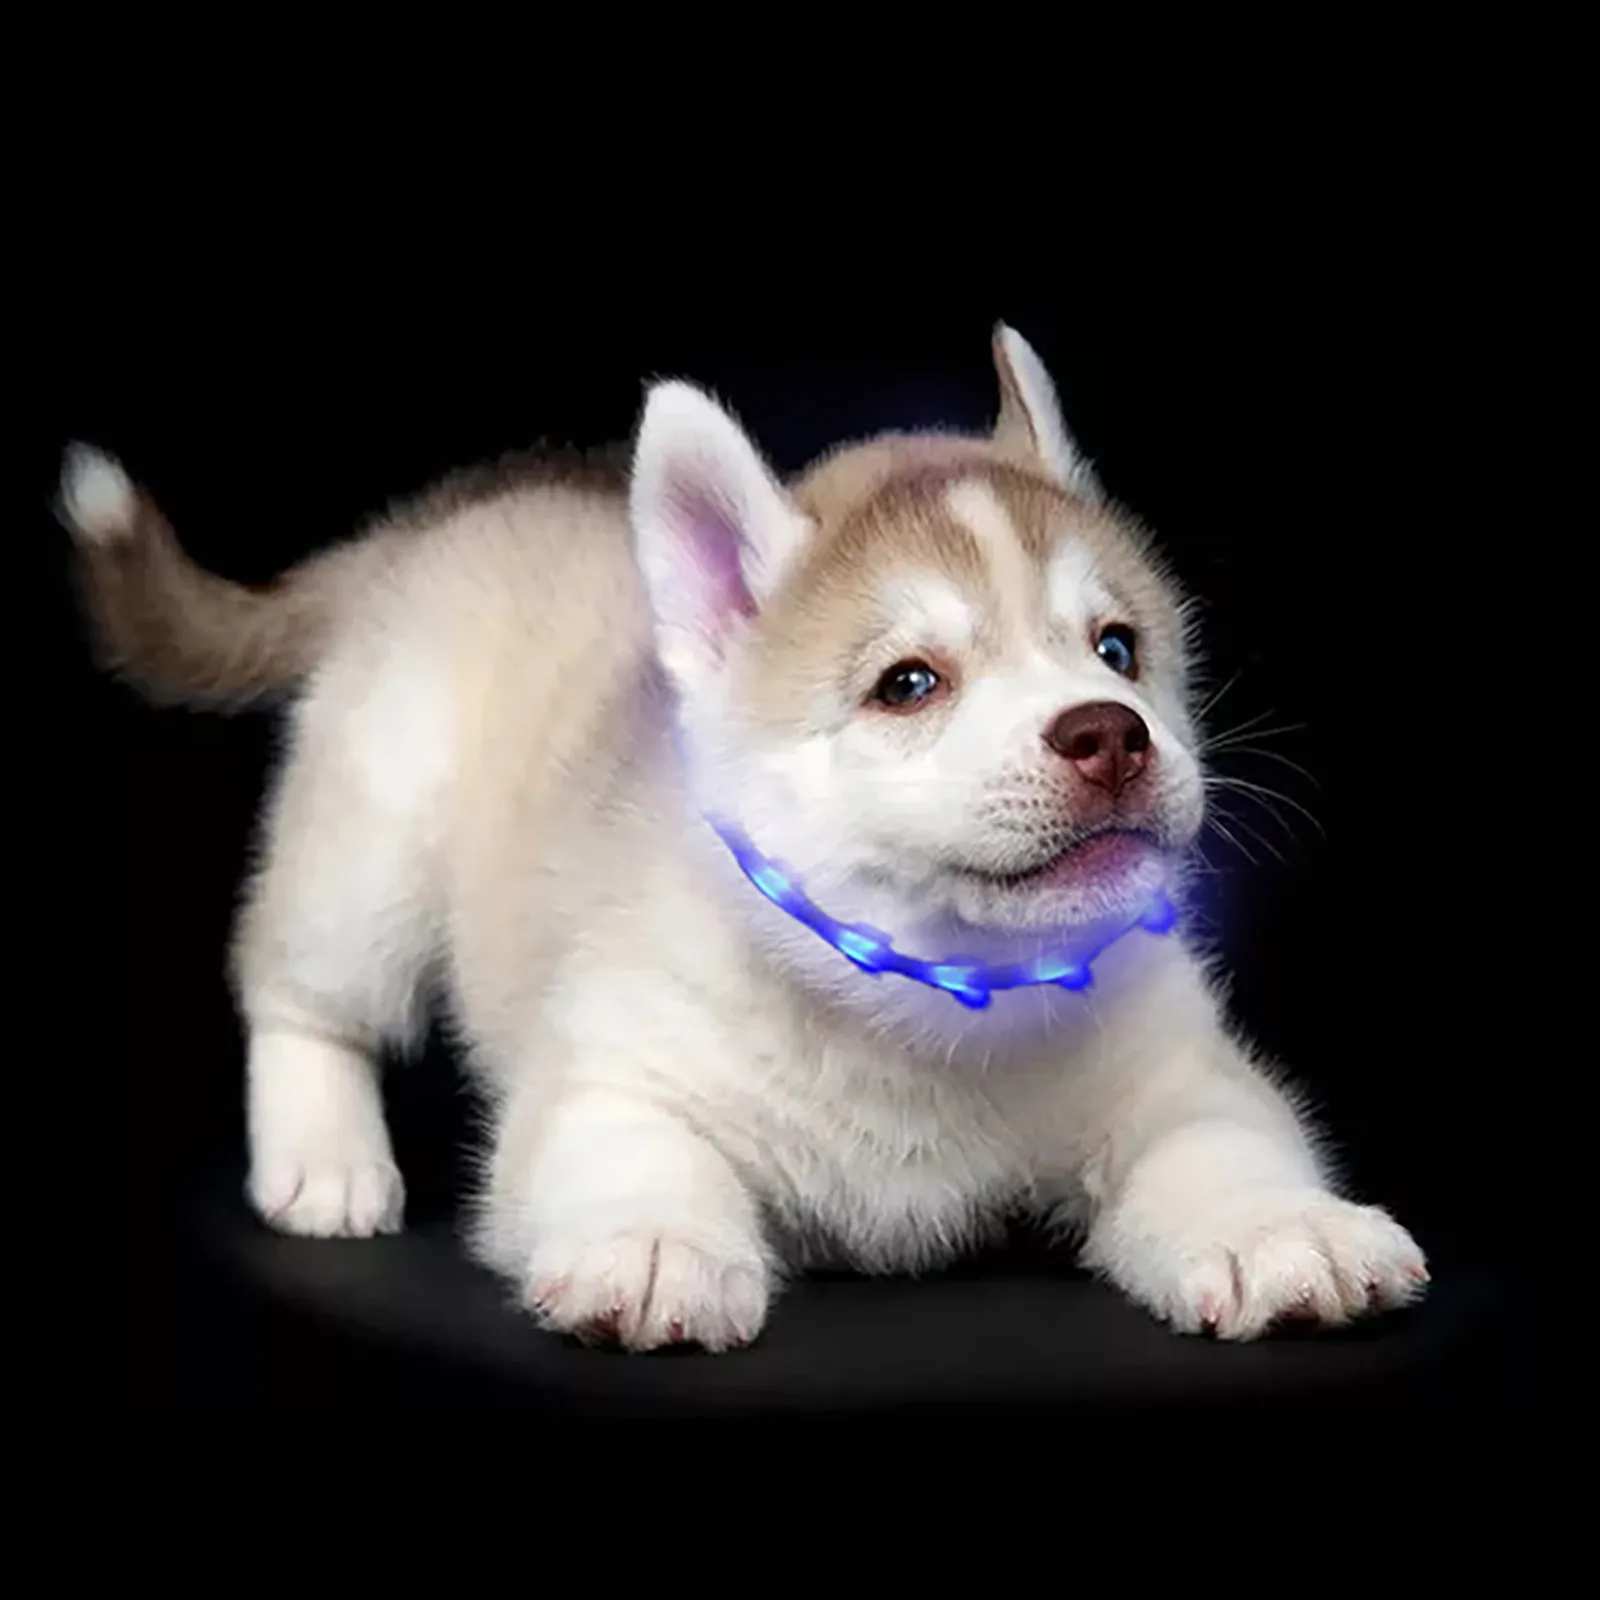 Led Luminous Collar Usb Charging Dog Color 12 Led Dog Collar Lights Night Dogs Collars Glowing Night Safety Dog Accessories